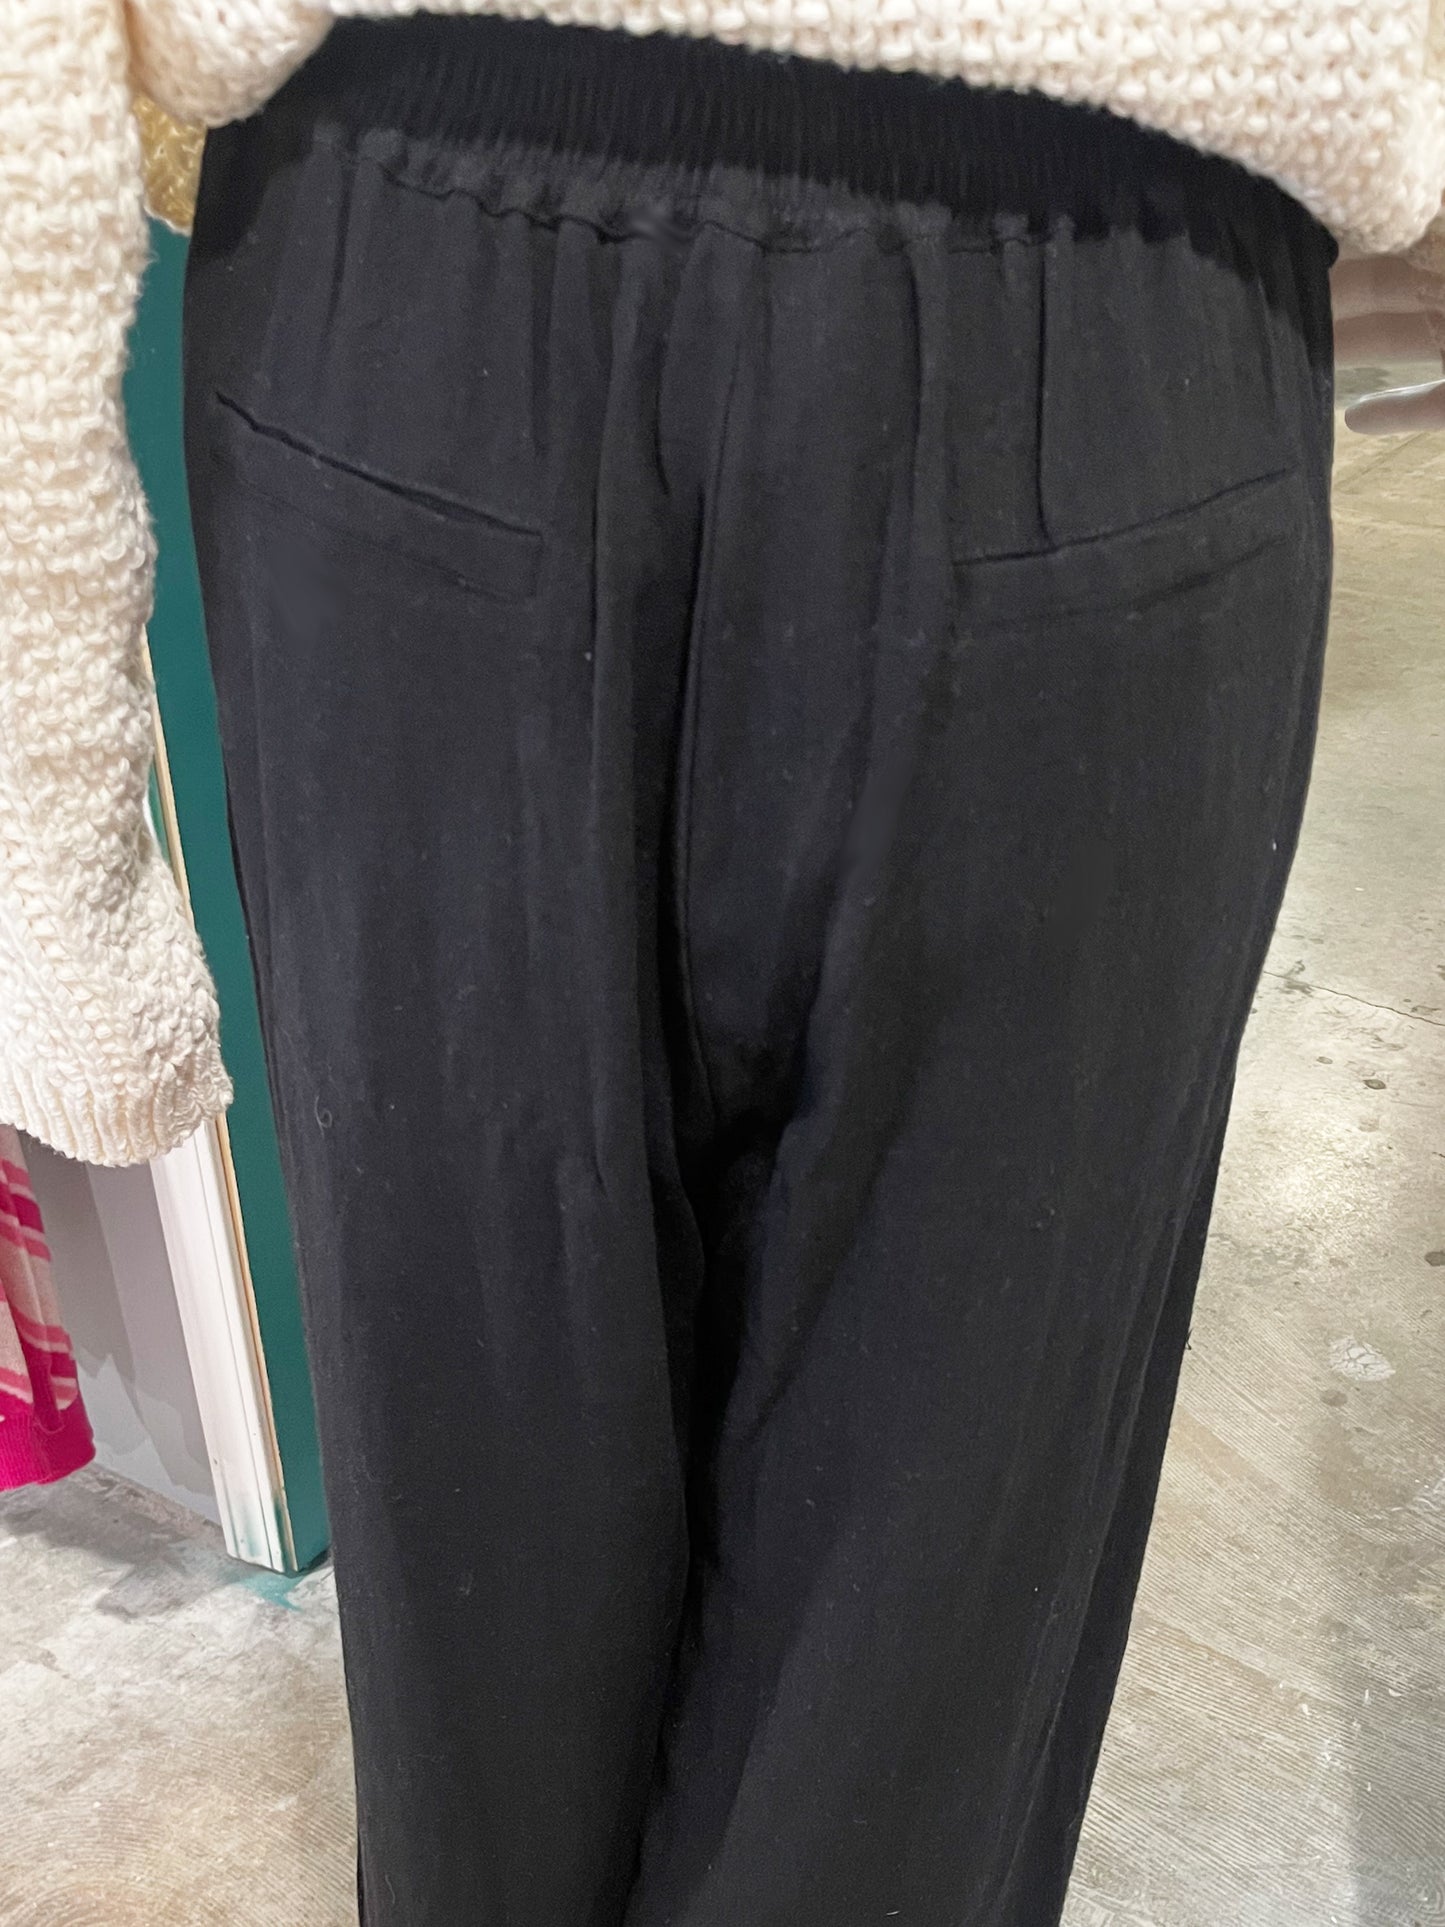 Classic is the new fabulous with these perfect black linen look slacks by Kori. So comfy and soft with an elastic back waisband, and roomy wide legs that hang perfectly for a flattering fit. Front flap pockets, button closure. Dress up or down, these are office perfect to date night chic. 100% Rayon.